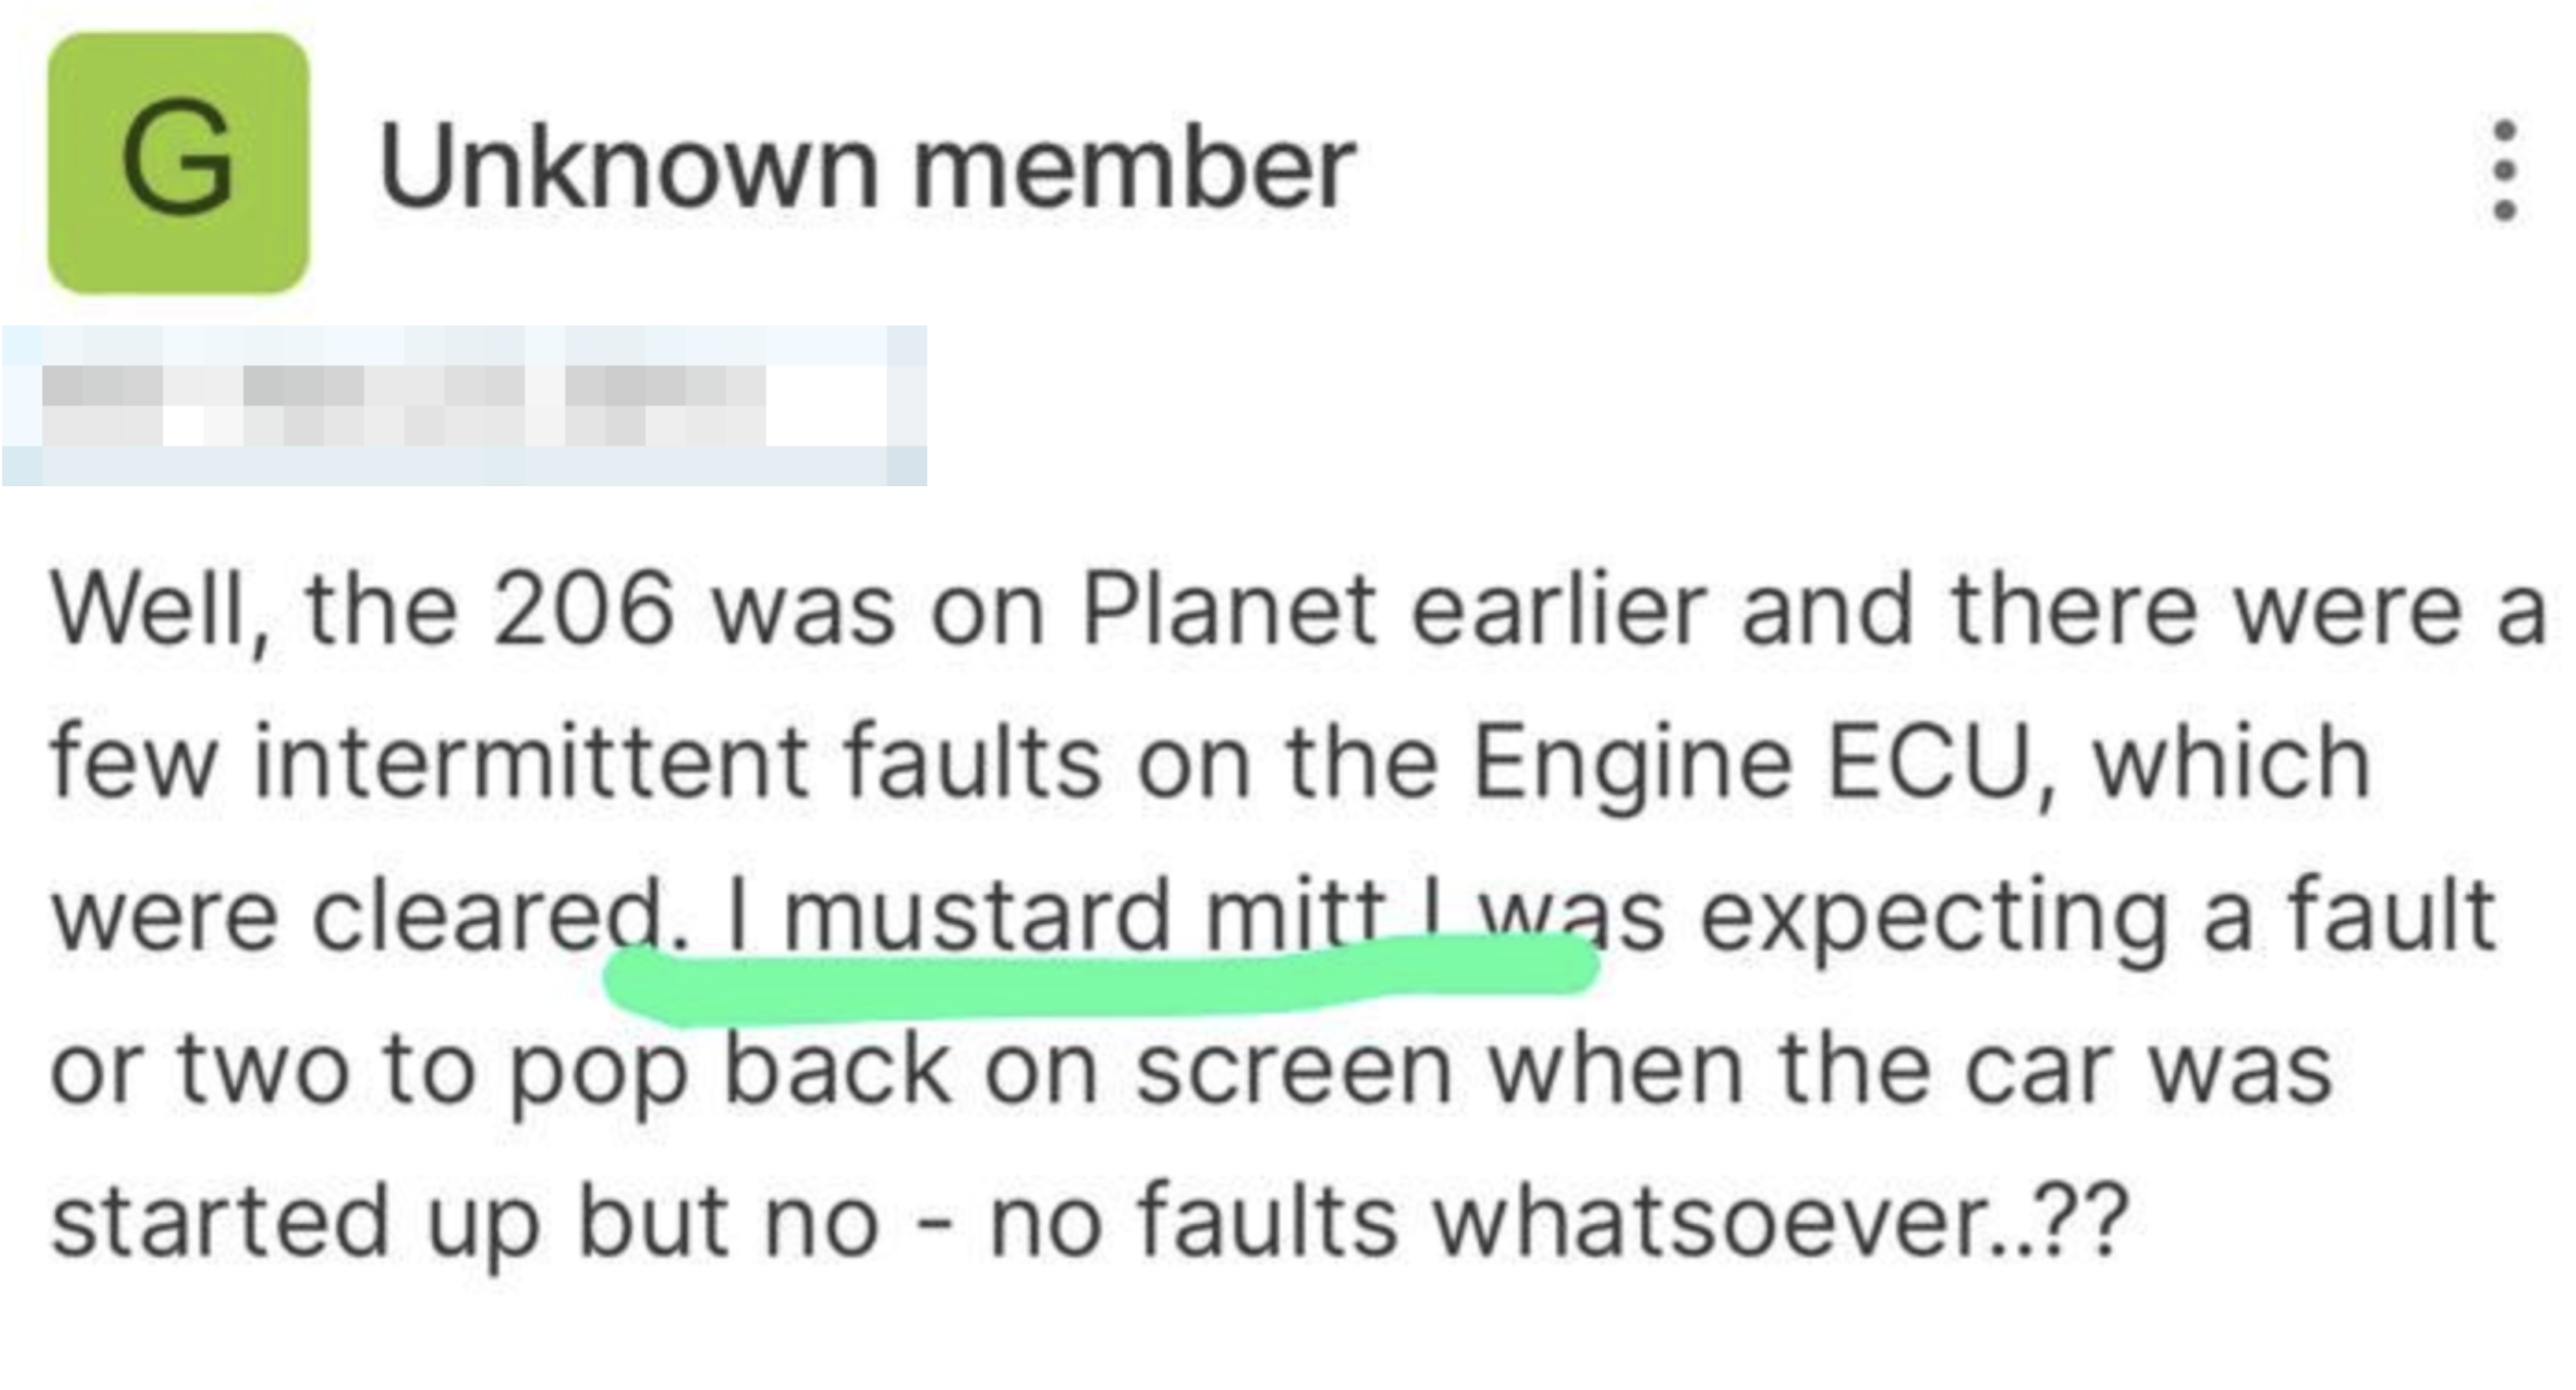 Summarized text: A forum post by an unknown member discussing intermittent faults on a car&#x27;s Engine ECU that were cleared and did not reappear